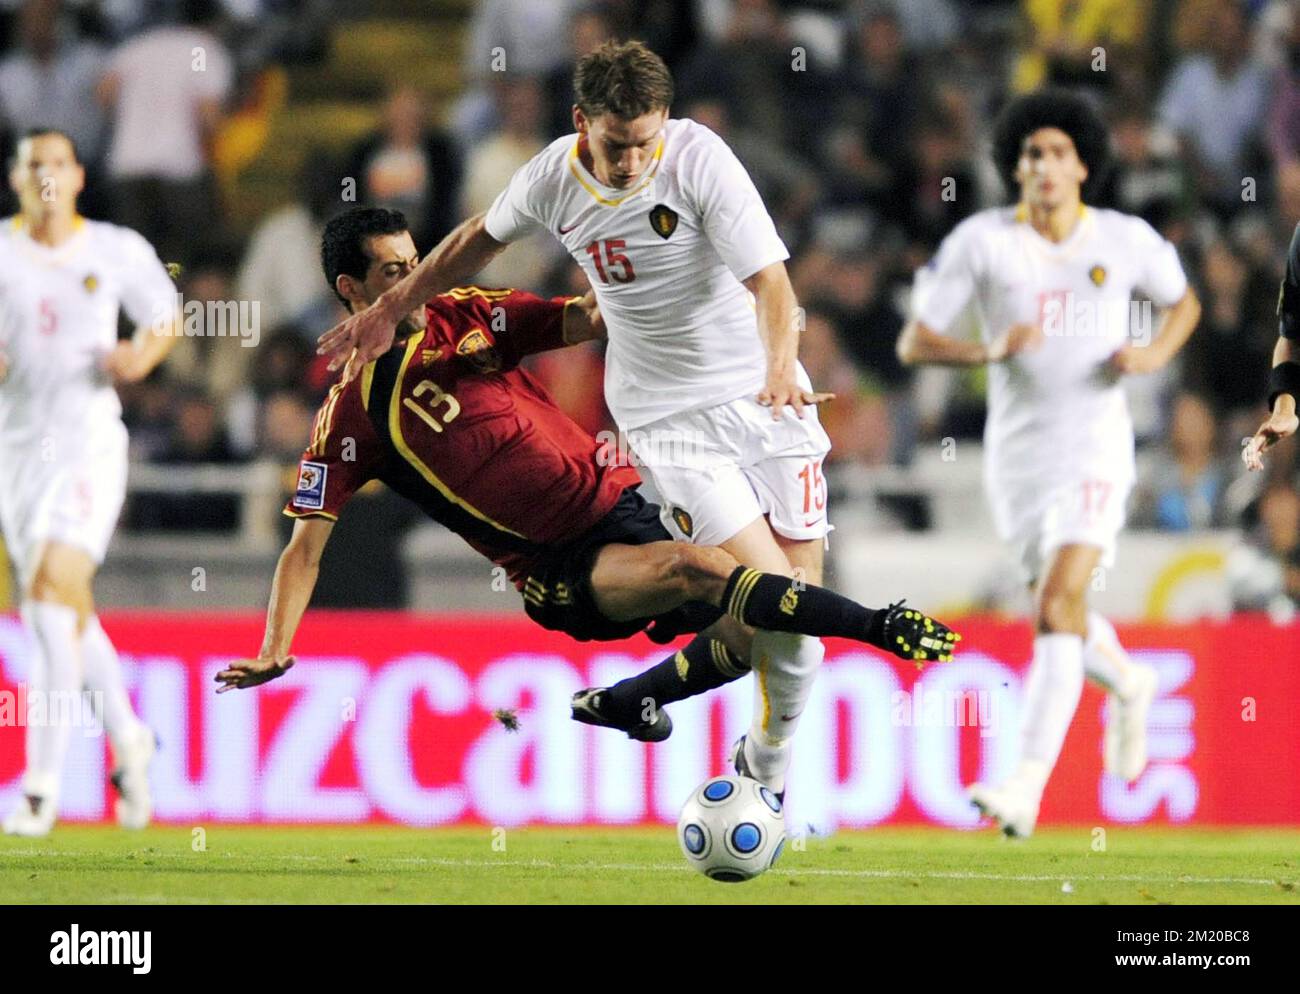 20090905 - LA CORUNA, SPAIN: (L-R) Spain's Sergio Busquets and Belgium's Jan Vertonghen fight for the ball during the qualification match Spain vs Belgium, for the South Africa 2010 Soccer World Championships, Saturday 05 September 2009, at the Riazor stadium in La Coruna, Spain.  Stock Photo